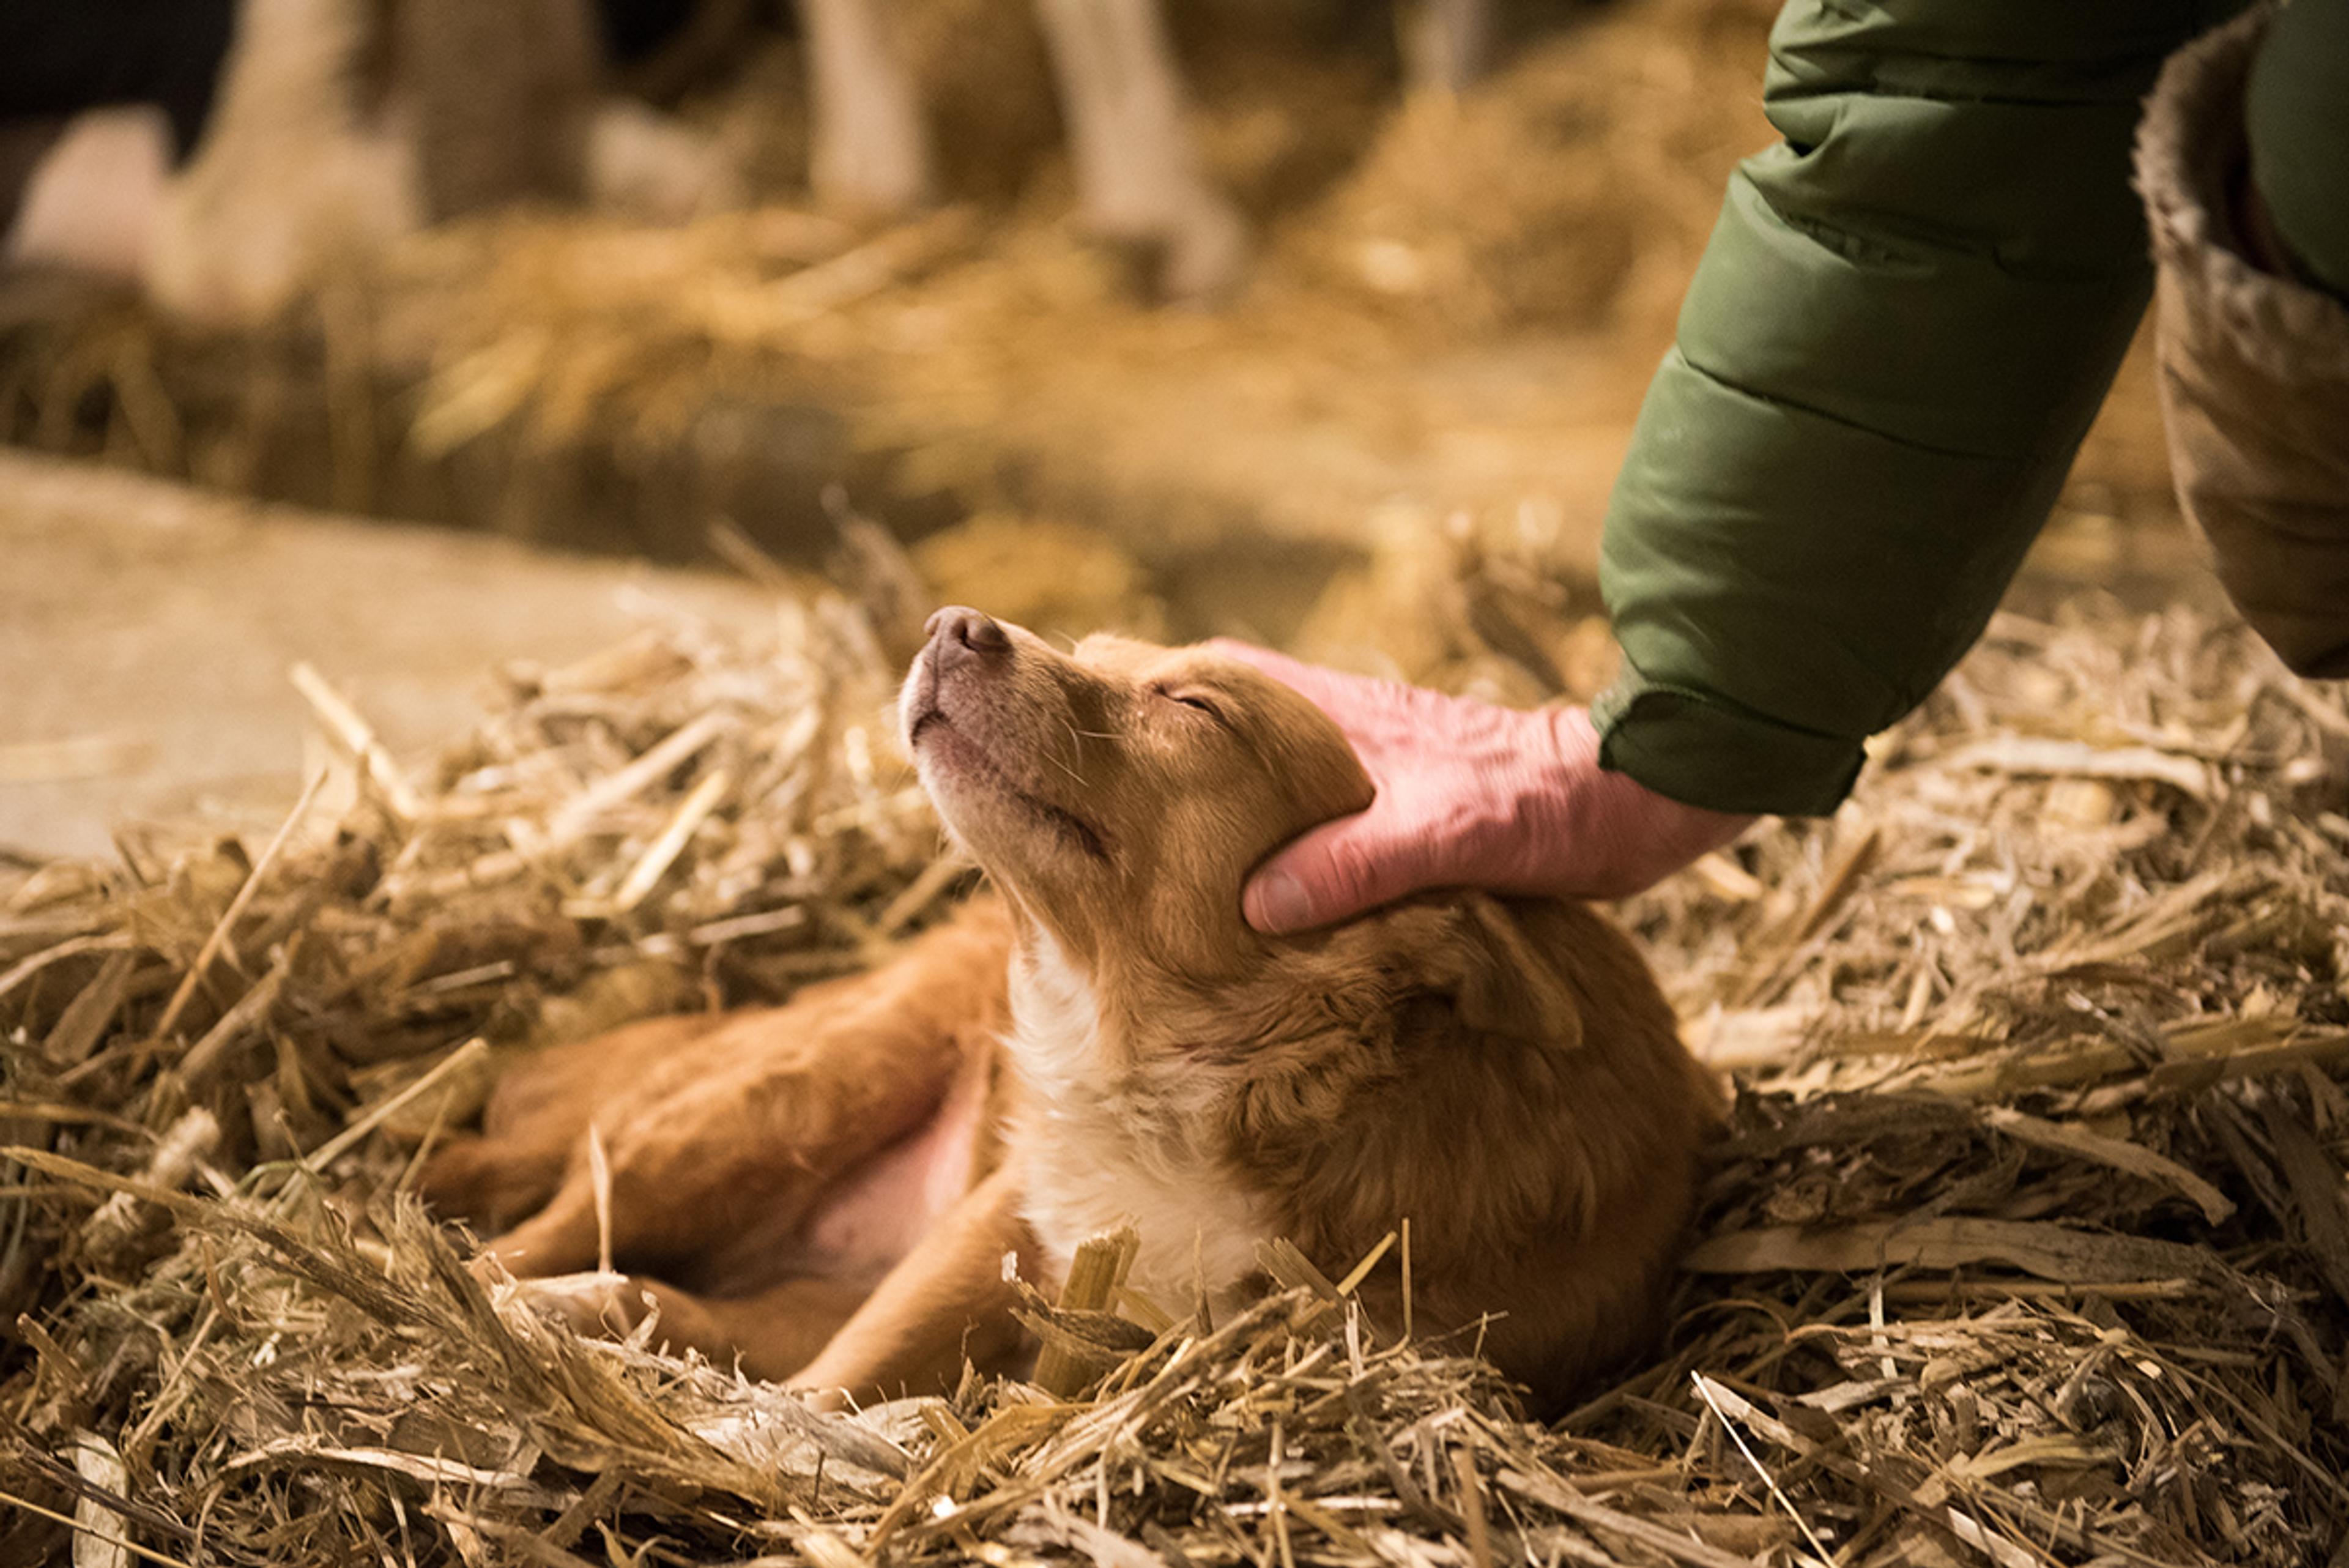 A yellow dog lying in some straw closes its eyes as a man pets its head.